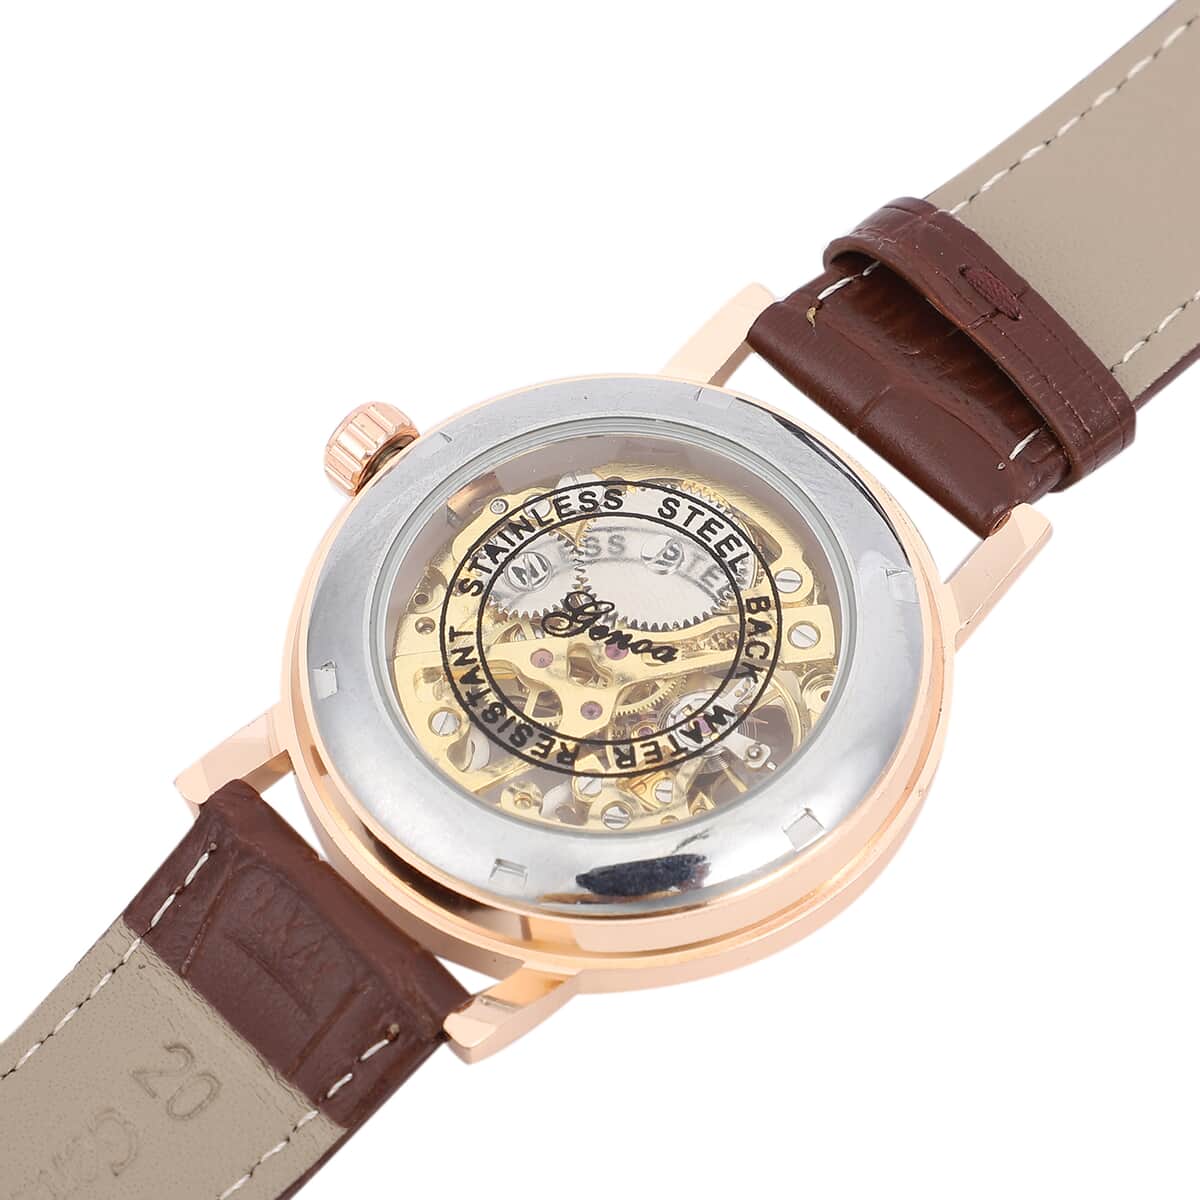 Genoa Automatic Mechanical Movement Hollowed Out Watch in Rosetone with Brown Leather Band image number 5